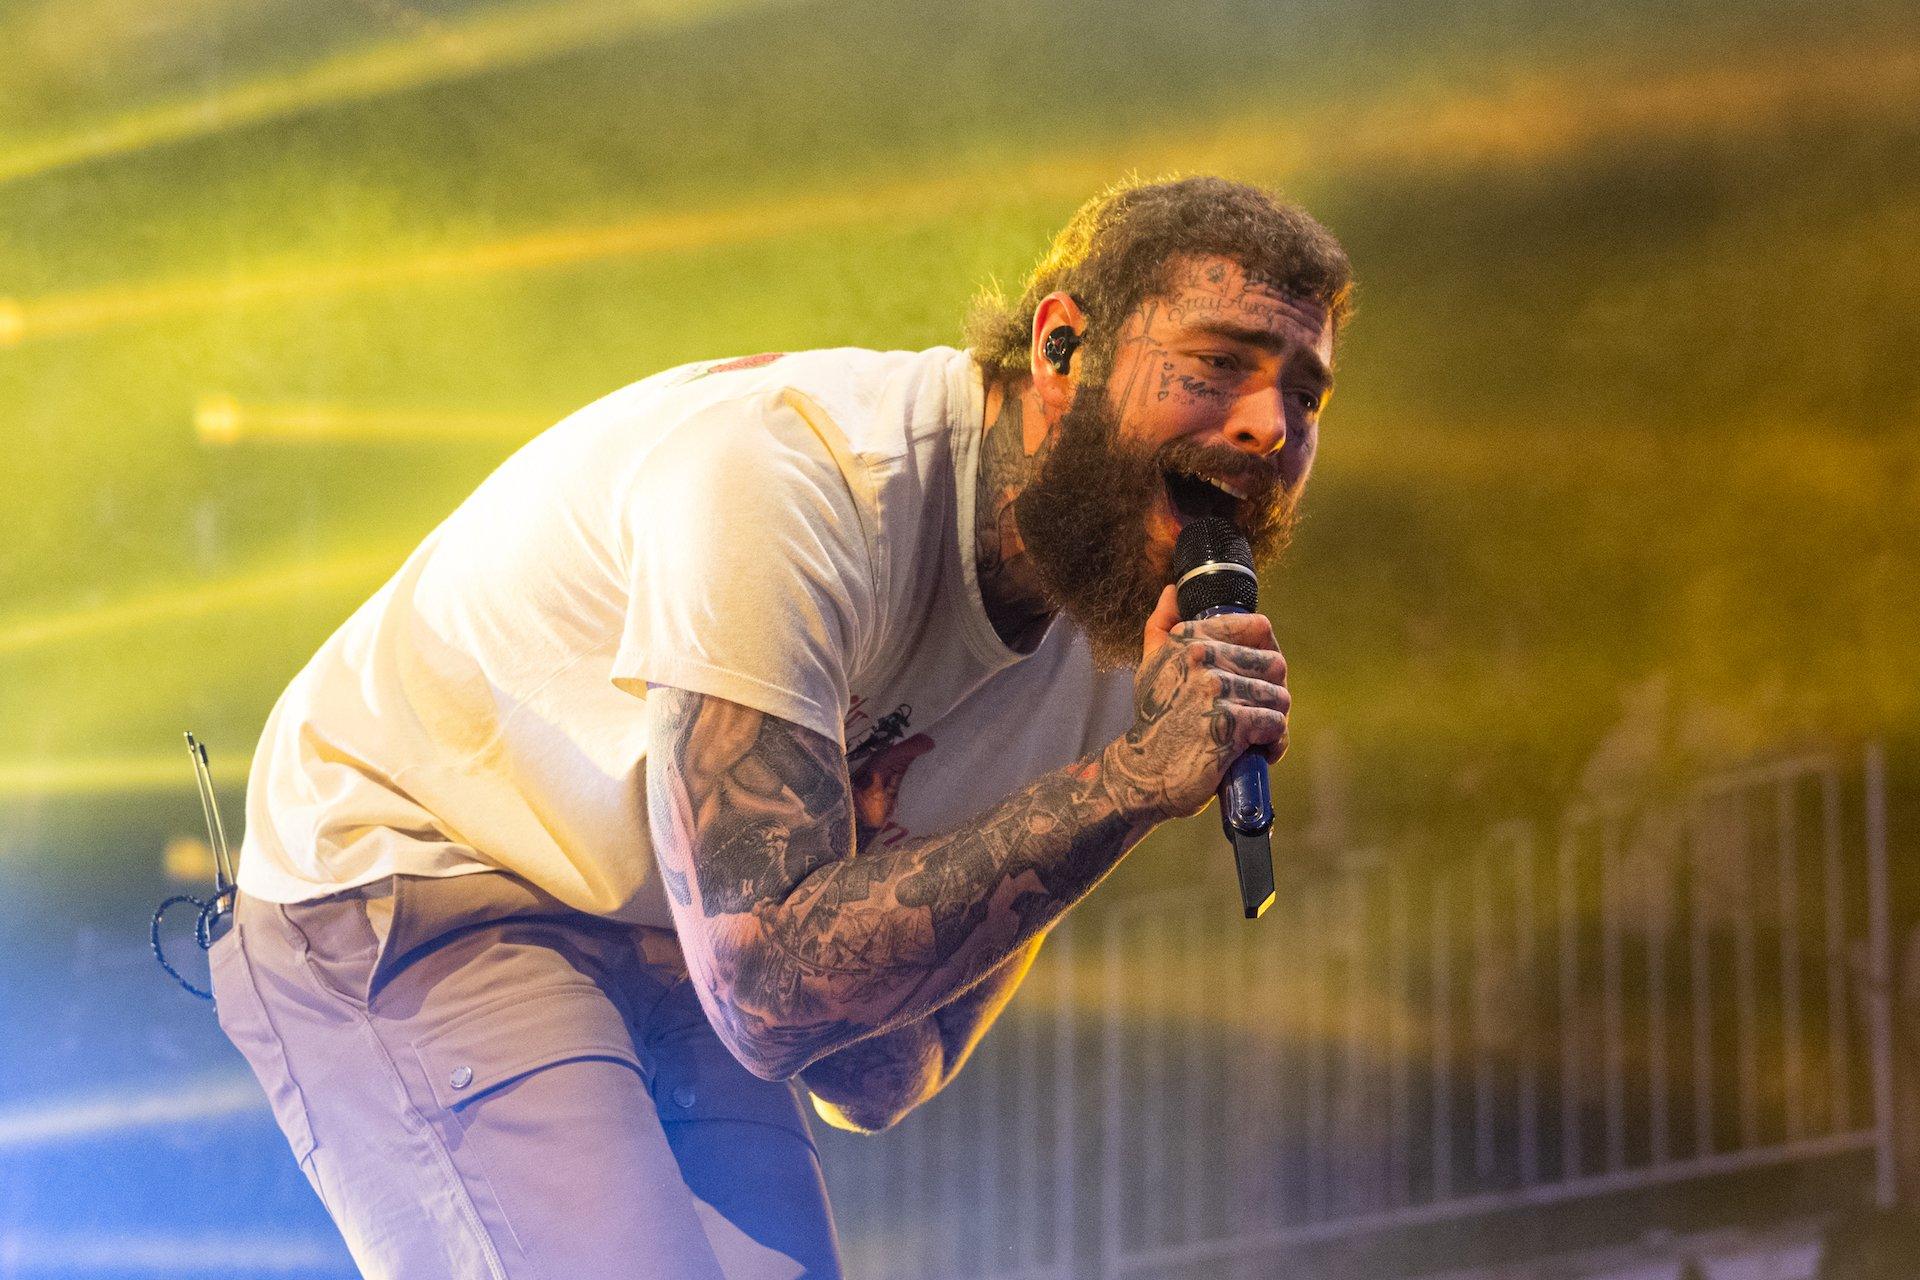 12 Post Malone Songs That Showcase His History-Making Vision, From